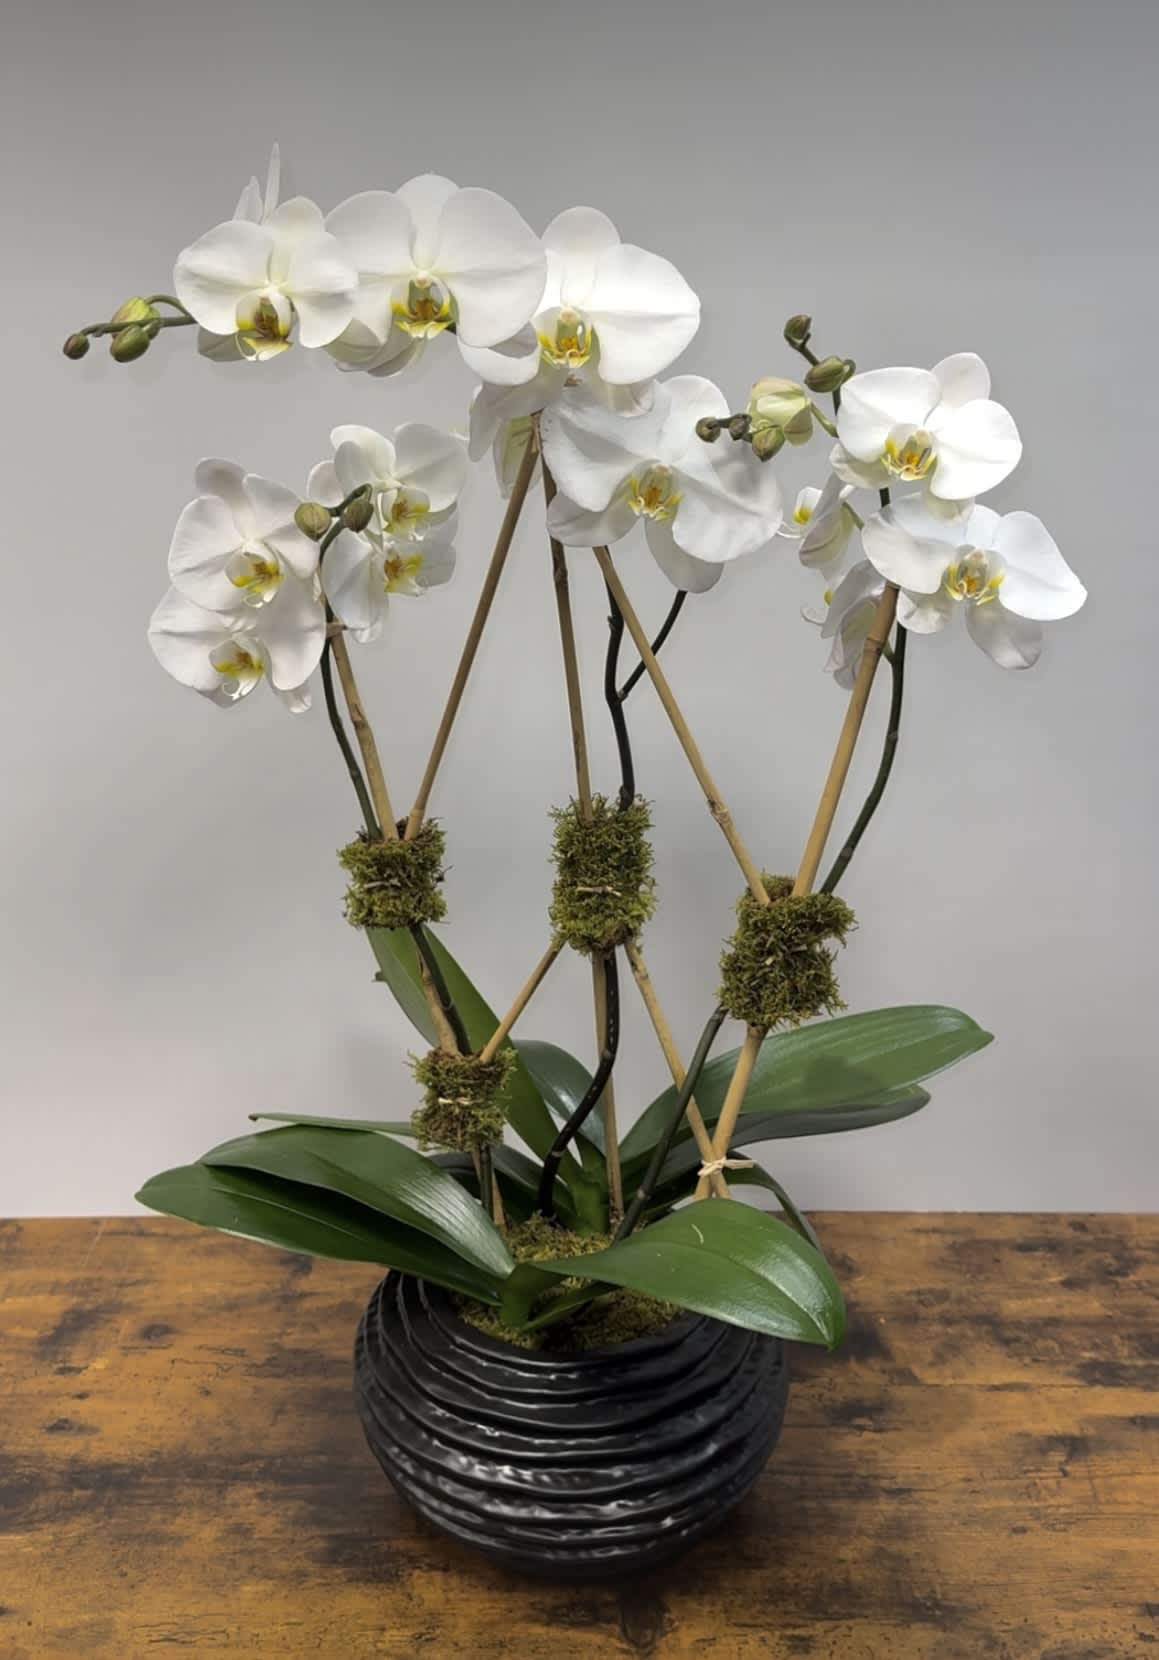 Ceramic Orchids - Triple stem white Phalaenopsis Orchid planted in a decorative black ceramic. This container size shown can hold 3 stems or you can upgrade to deluxe for 4 stems.